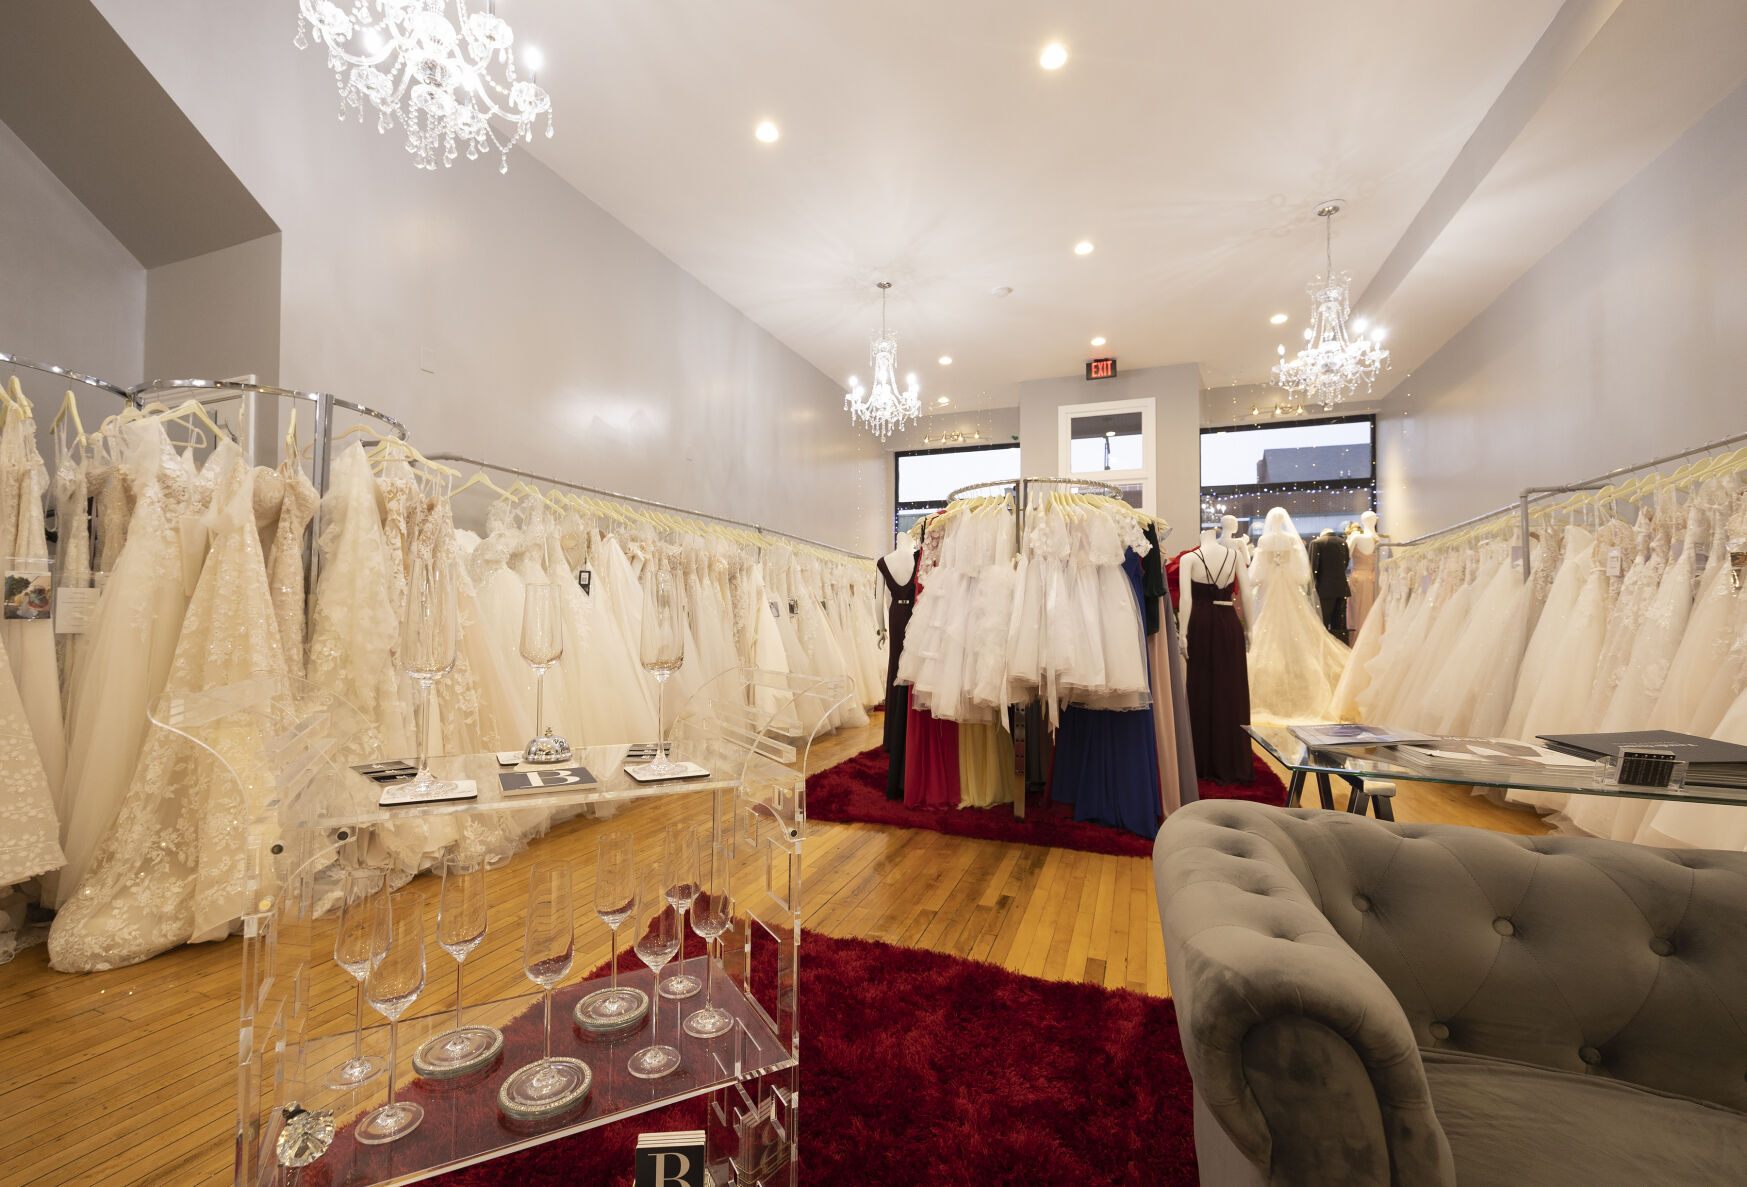 Interior of All in One Bridal on Main Street in Dubuque.    PHOTO CREDIT: Stephen Gassman
Telegraph Herald